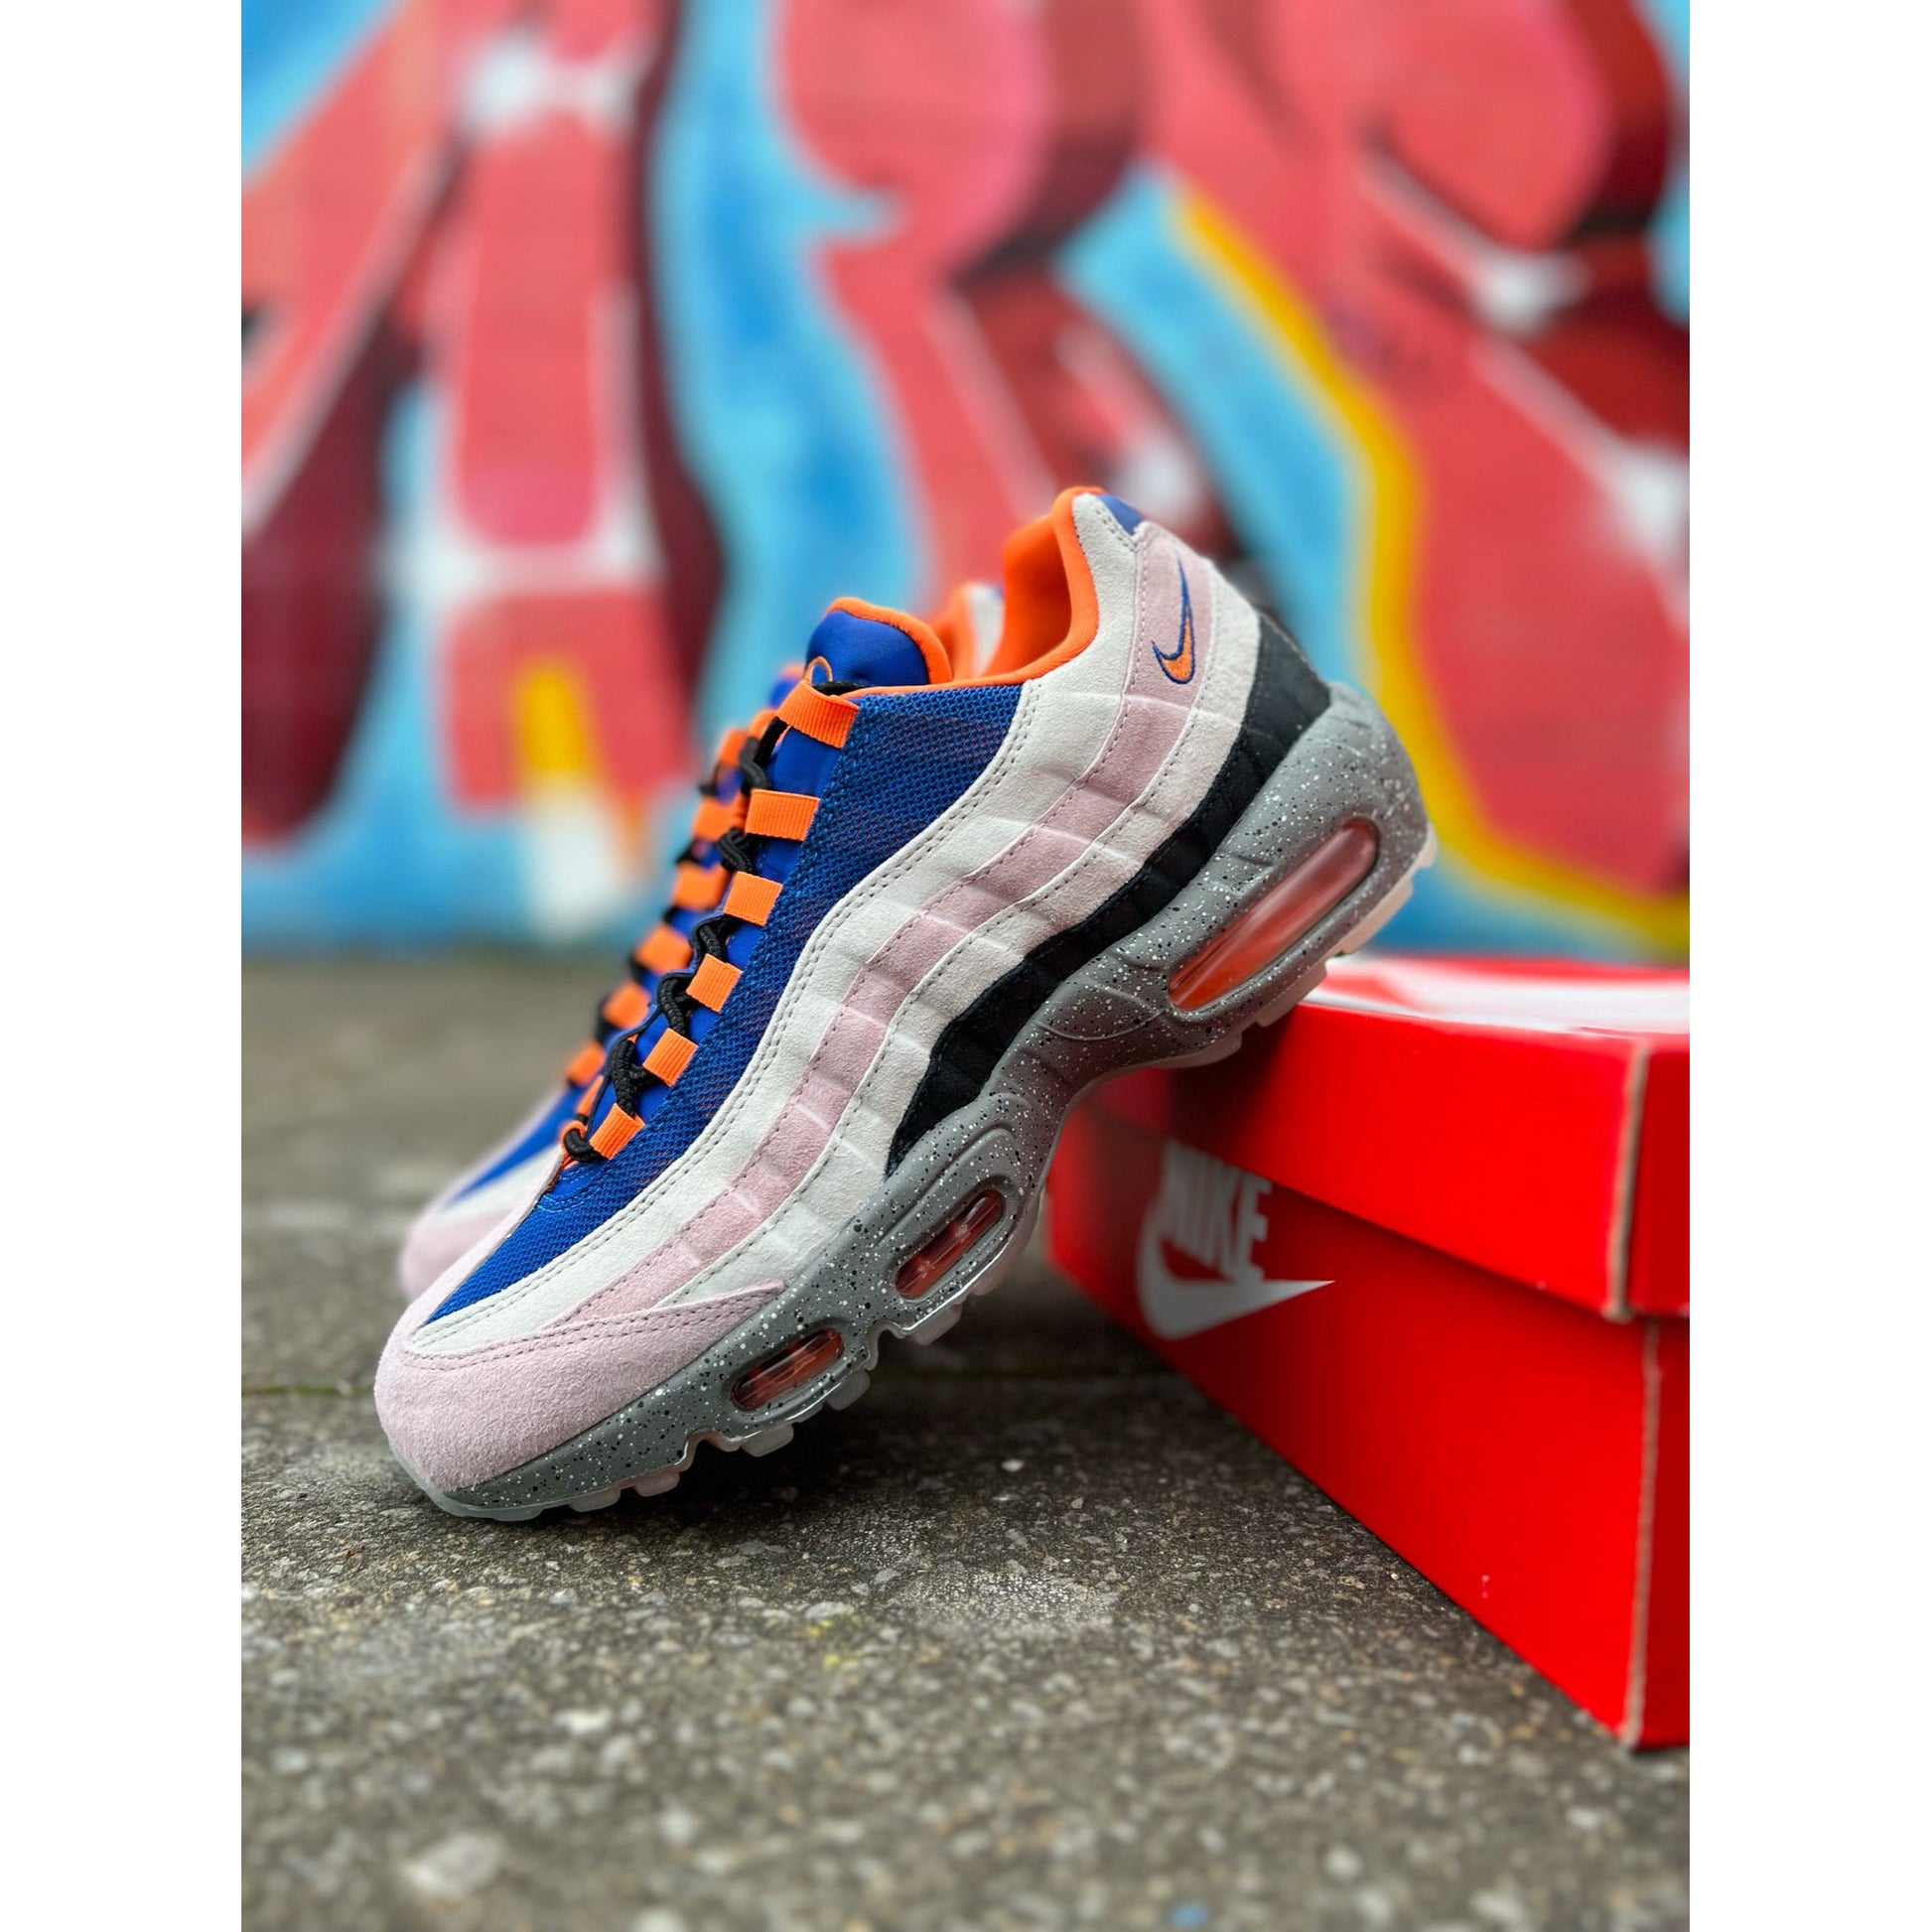 Nike Air Max 95 King of the Mountain by Nike from £250.00